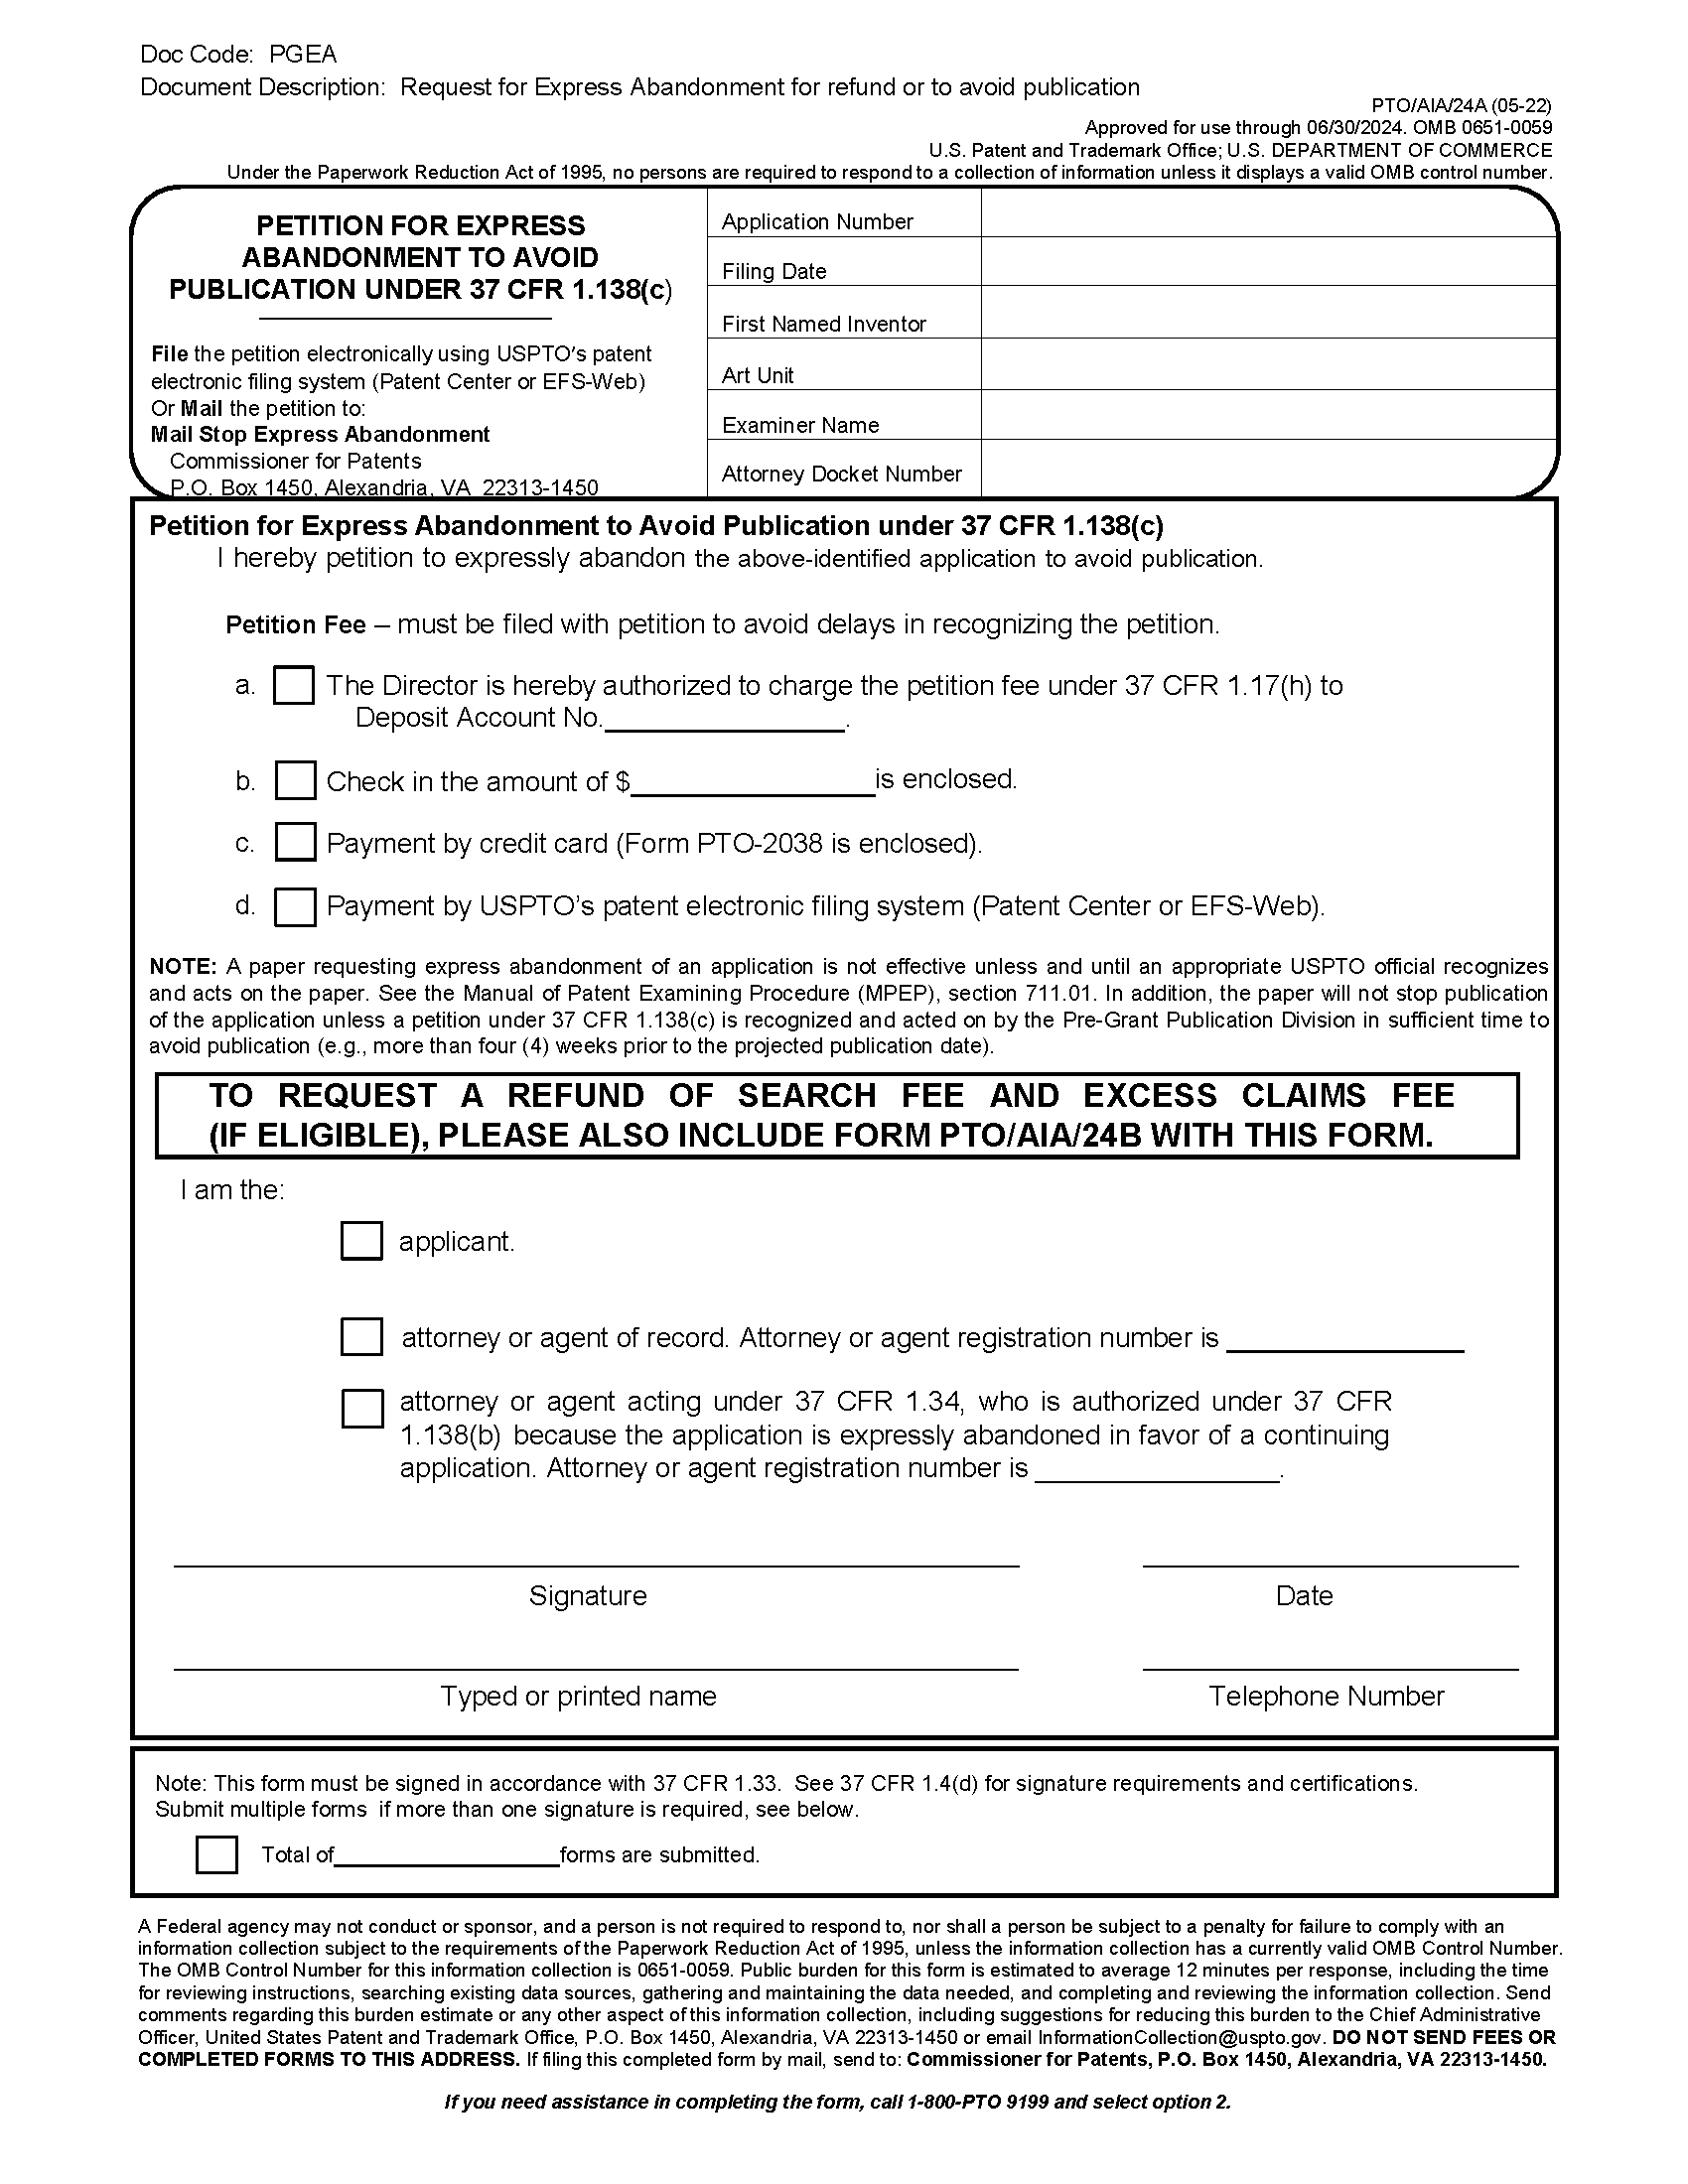 Form PTO/SB/24a Petition for Express Abandonment To Avoid Publication Under 37 CFR 1.138(c)